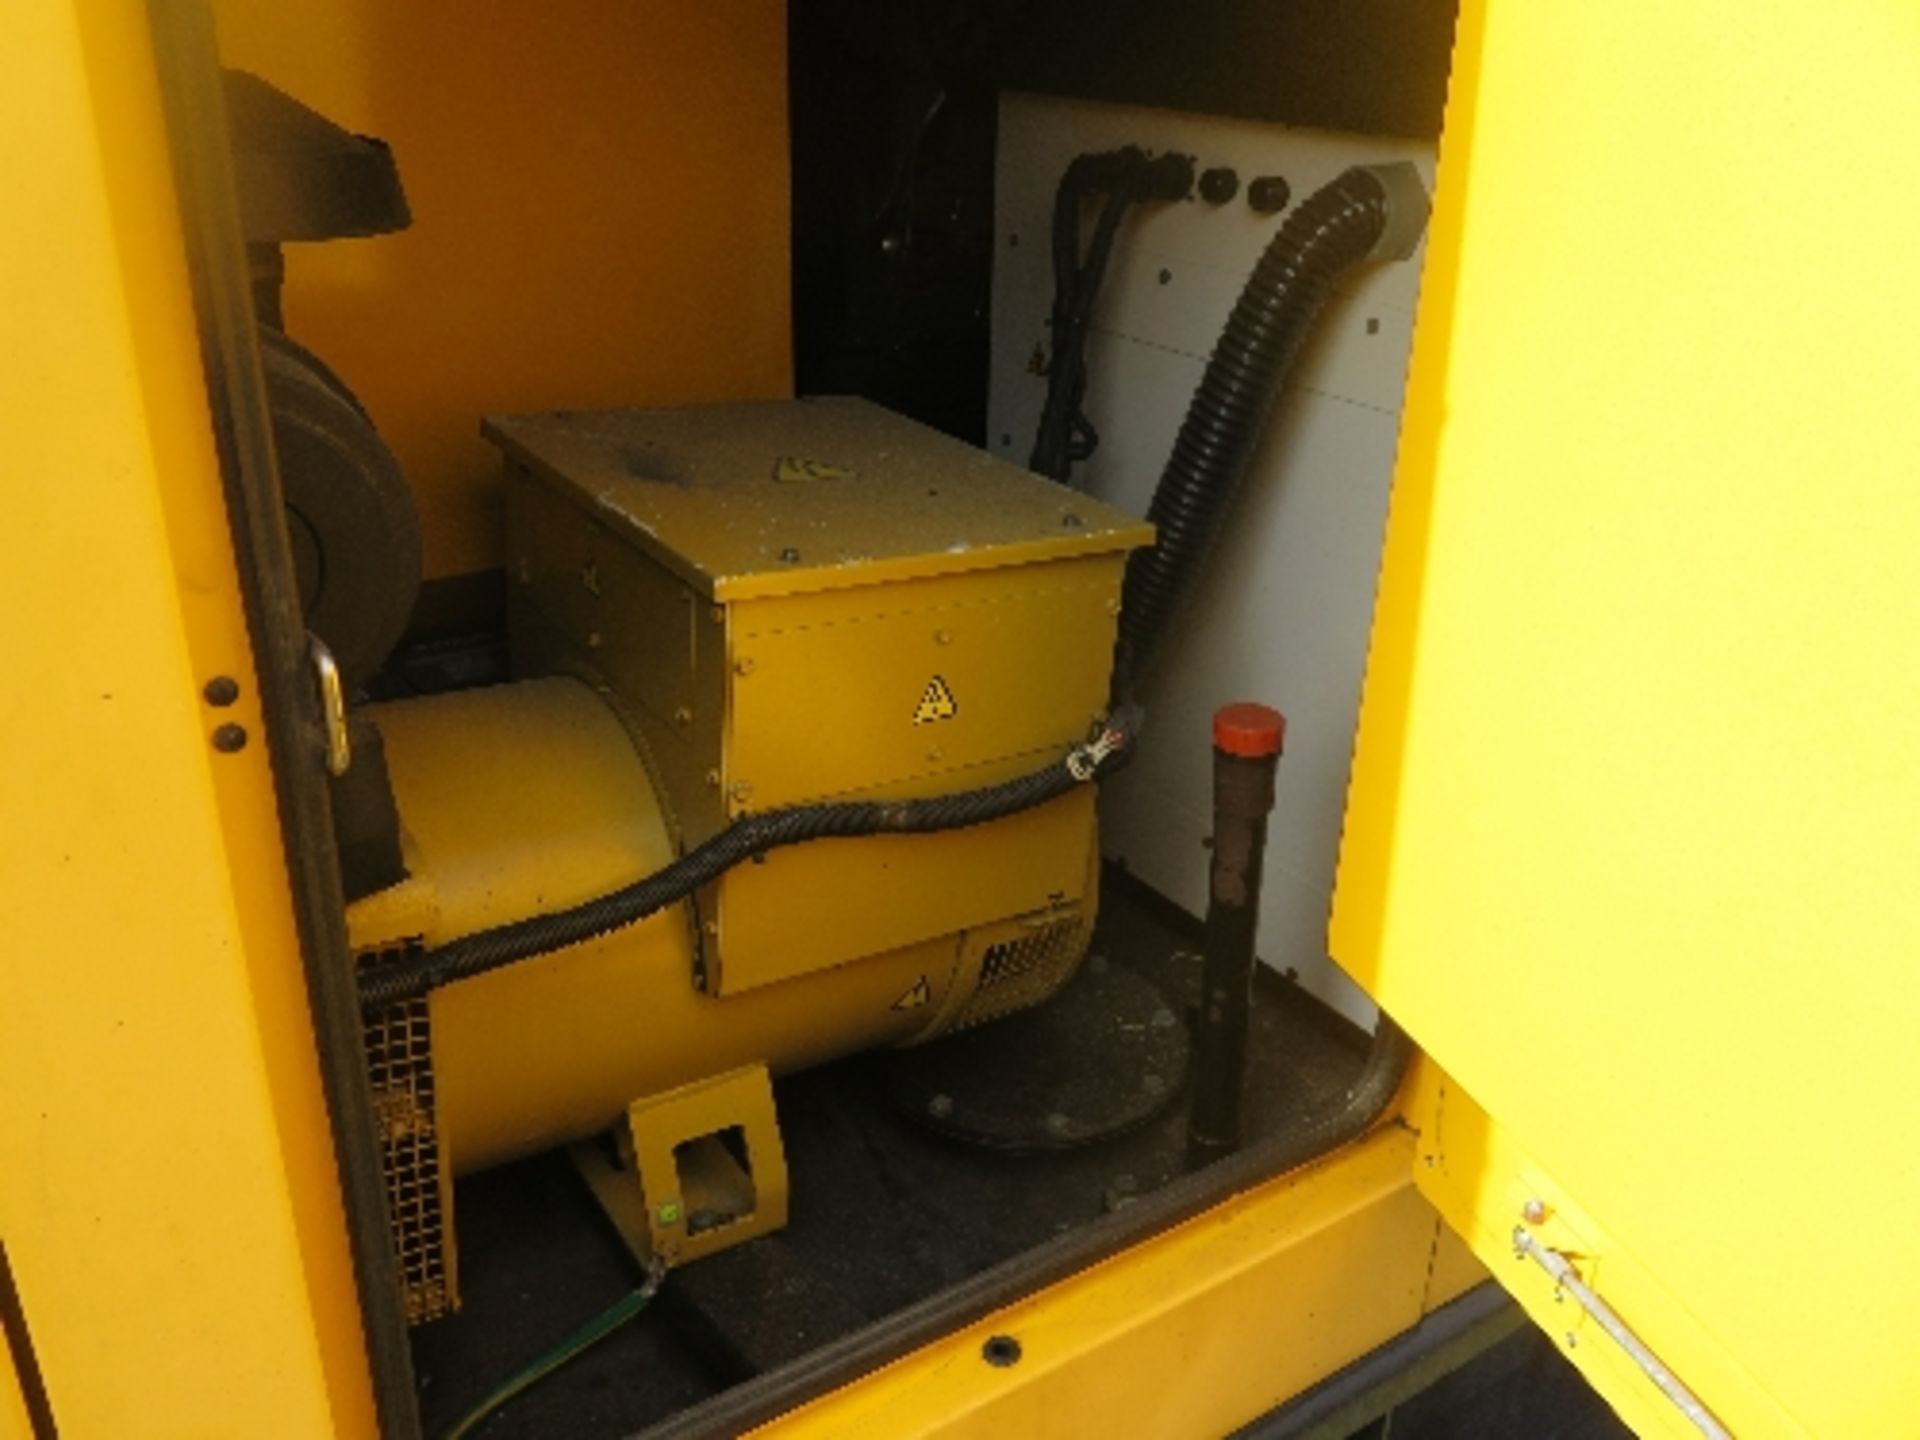 Caterpillar XQE80 generator 14819 hrs 157811
PERKINS - RUNS AND MAKES POWER
ALL LOTS are SOLD AS - Image 4 of 6